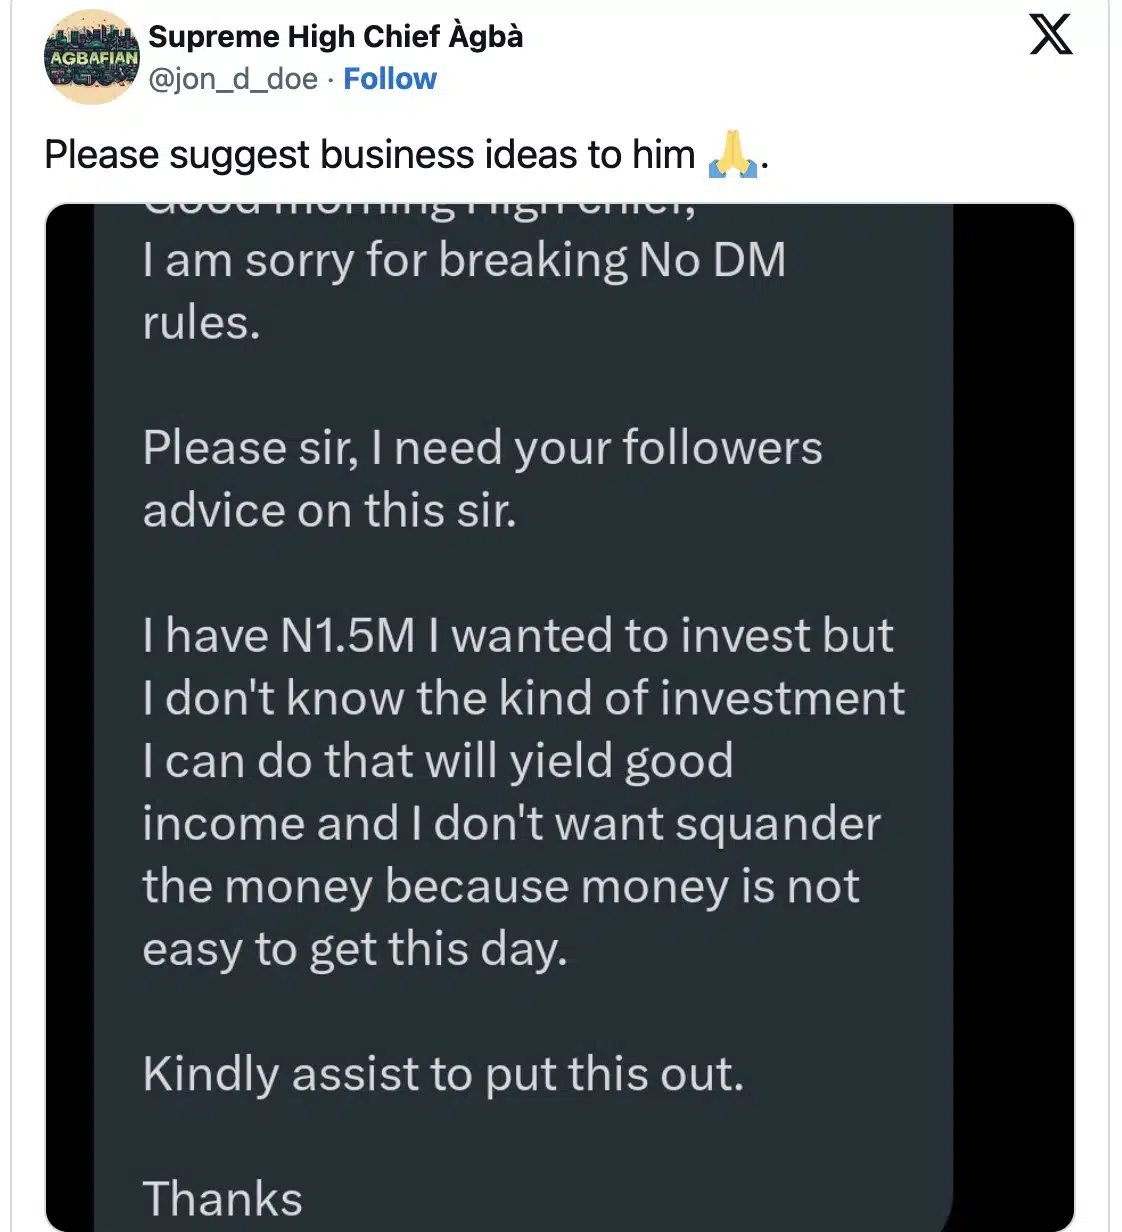 Nigerian man with N1.5M seeks advice on profitable business ideas to invest on